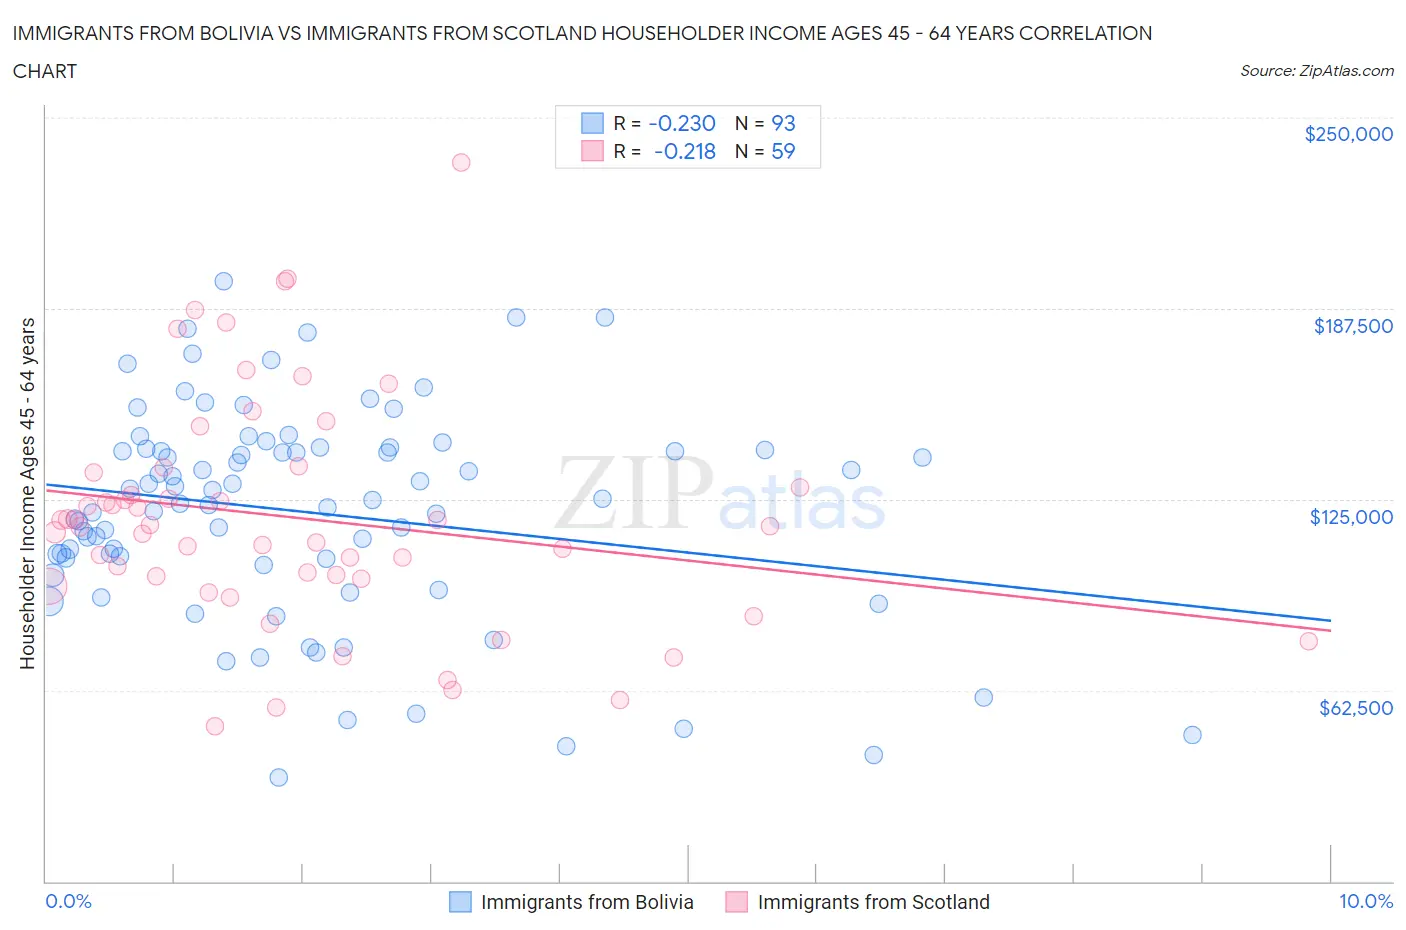 Immigrants from Bolivia vs Immigrants from Scotland Householder Income Ages 45 - 64 years